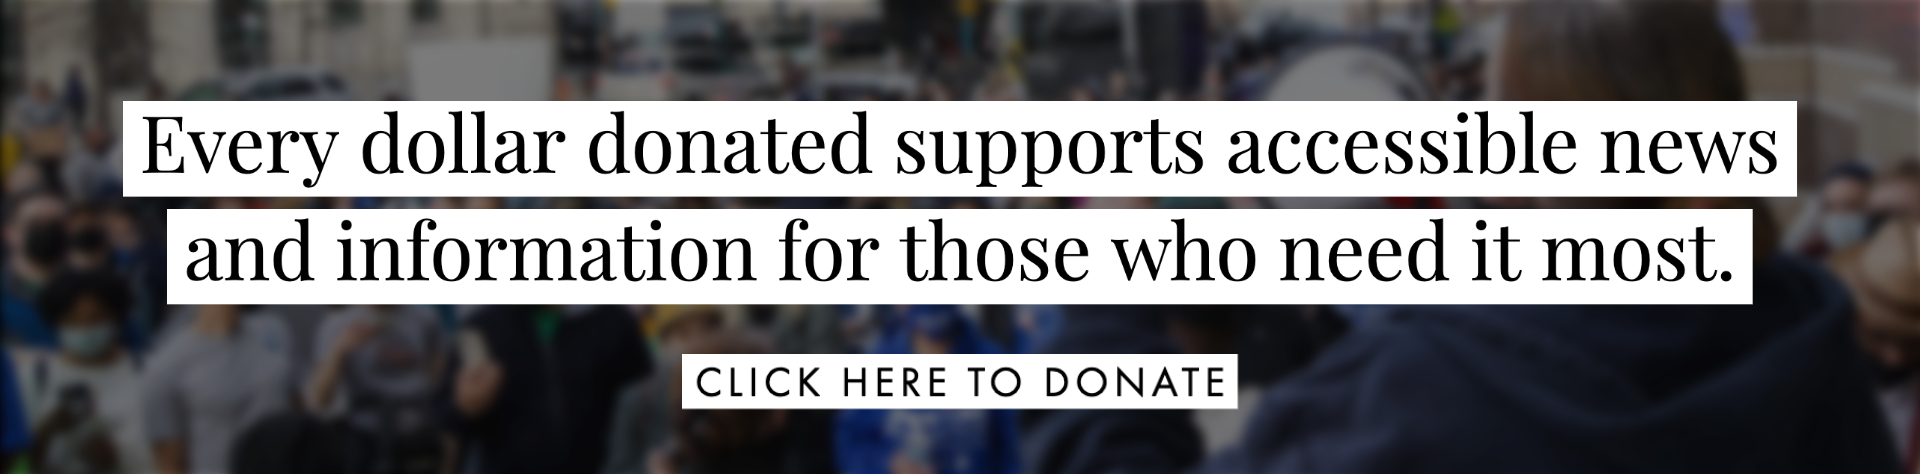 Every dollar donated supports accessible news and information for those who need it most.